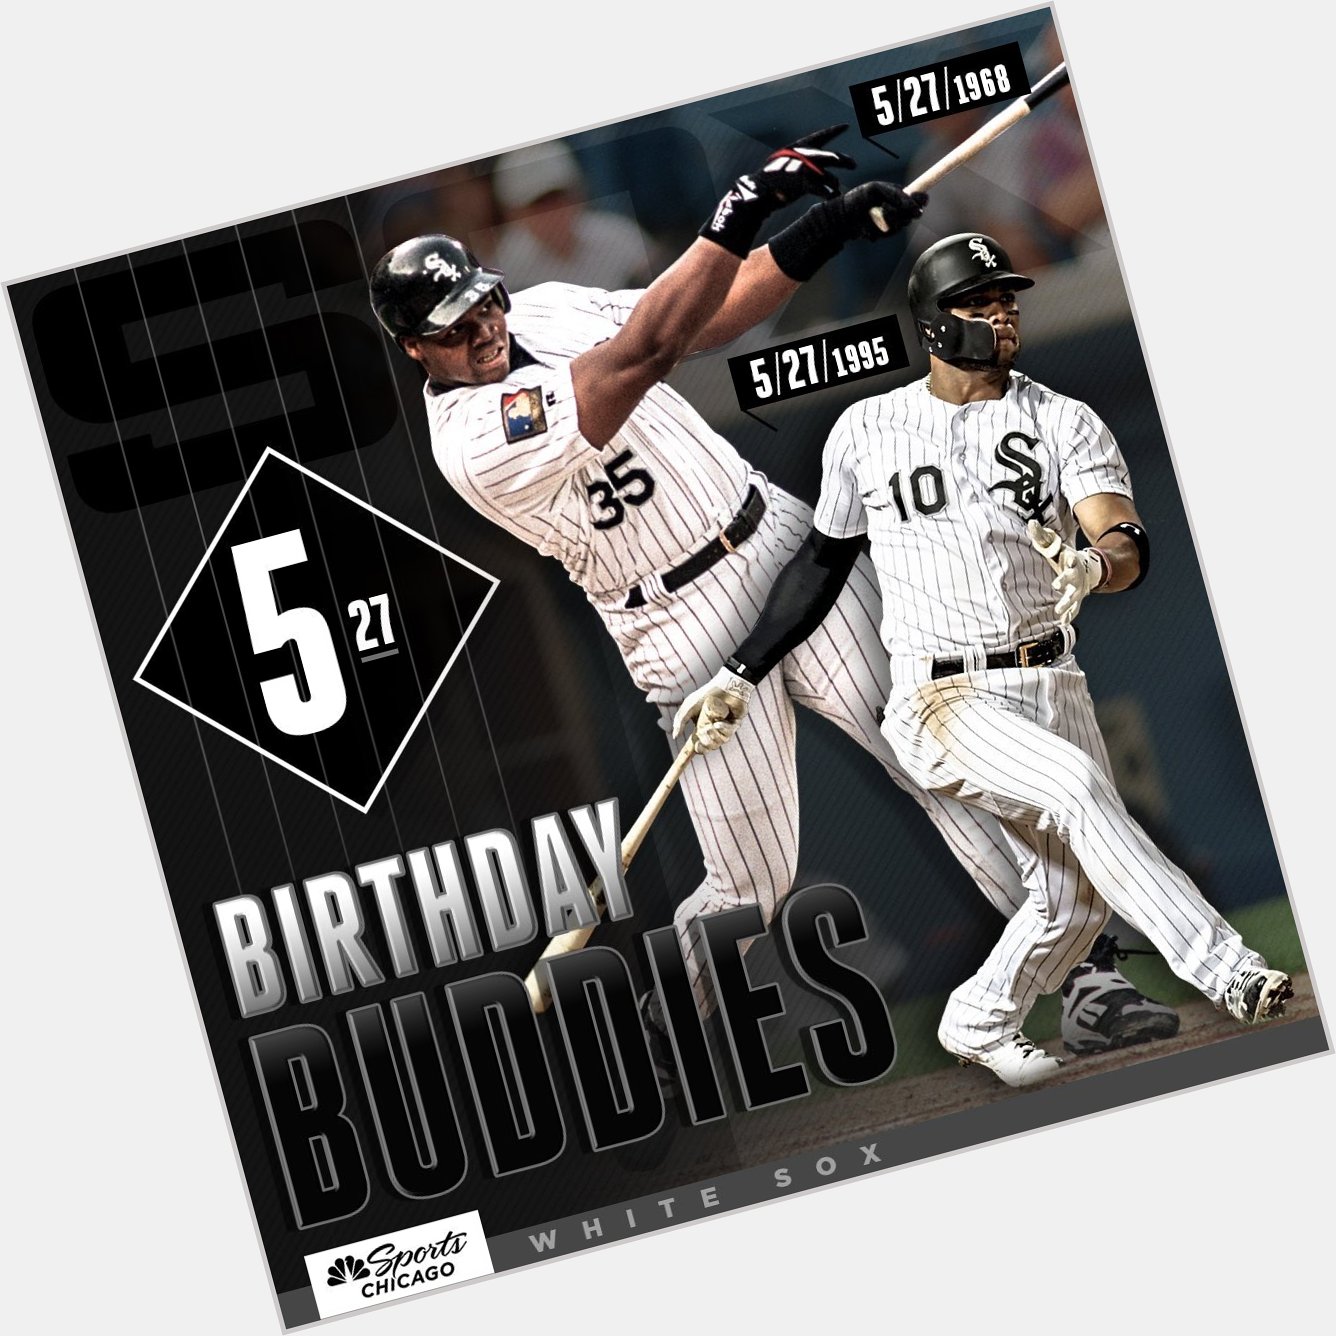 Happy Birthday and , let s wish another guy a Happy Birthday too, Jeff Bagwell. 